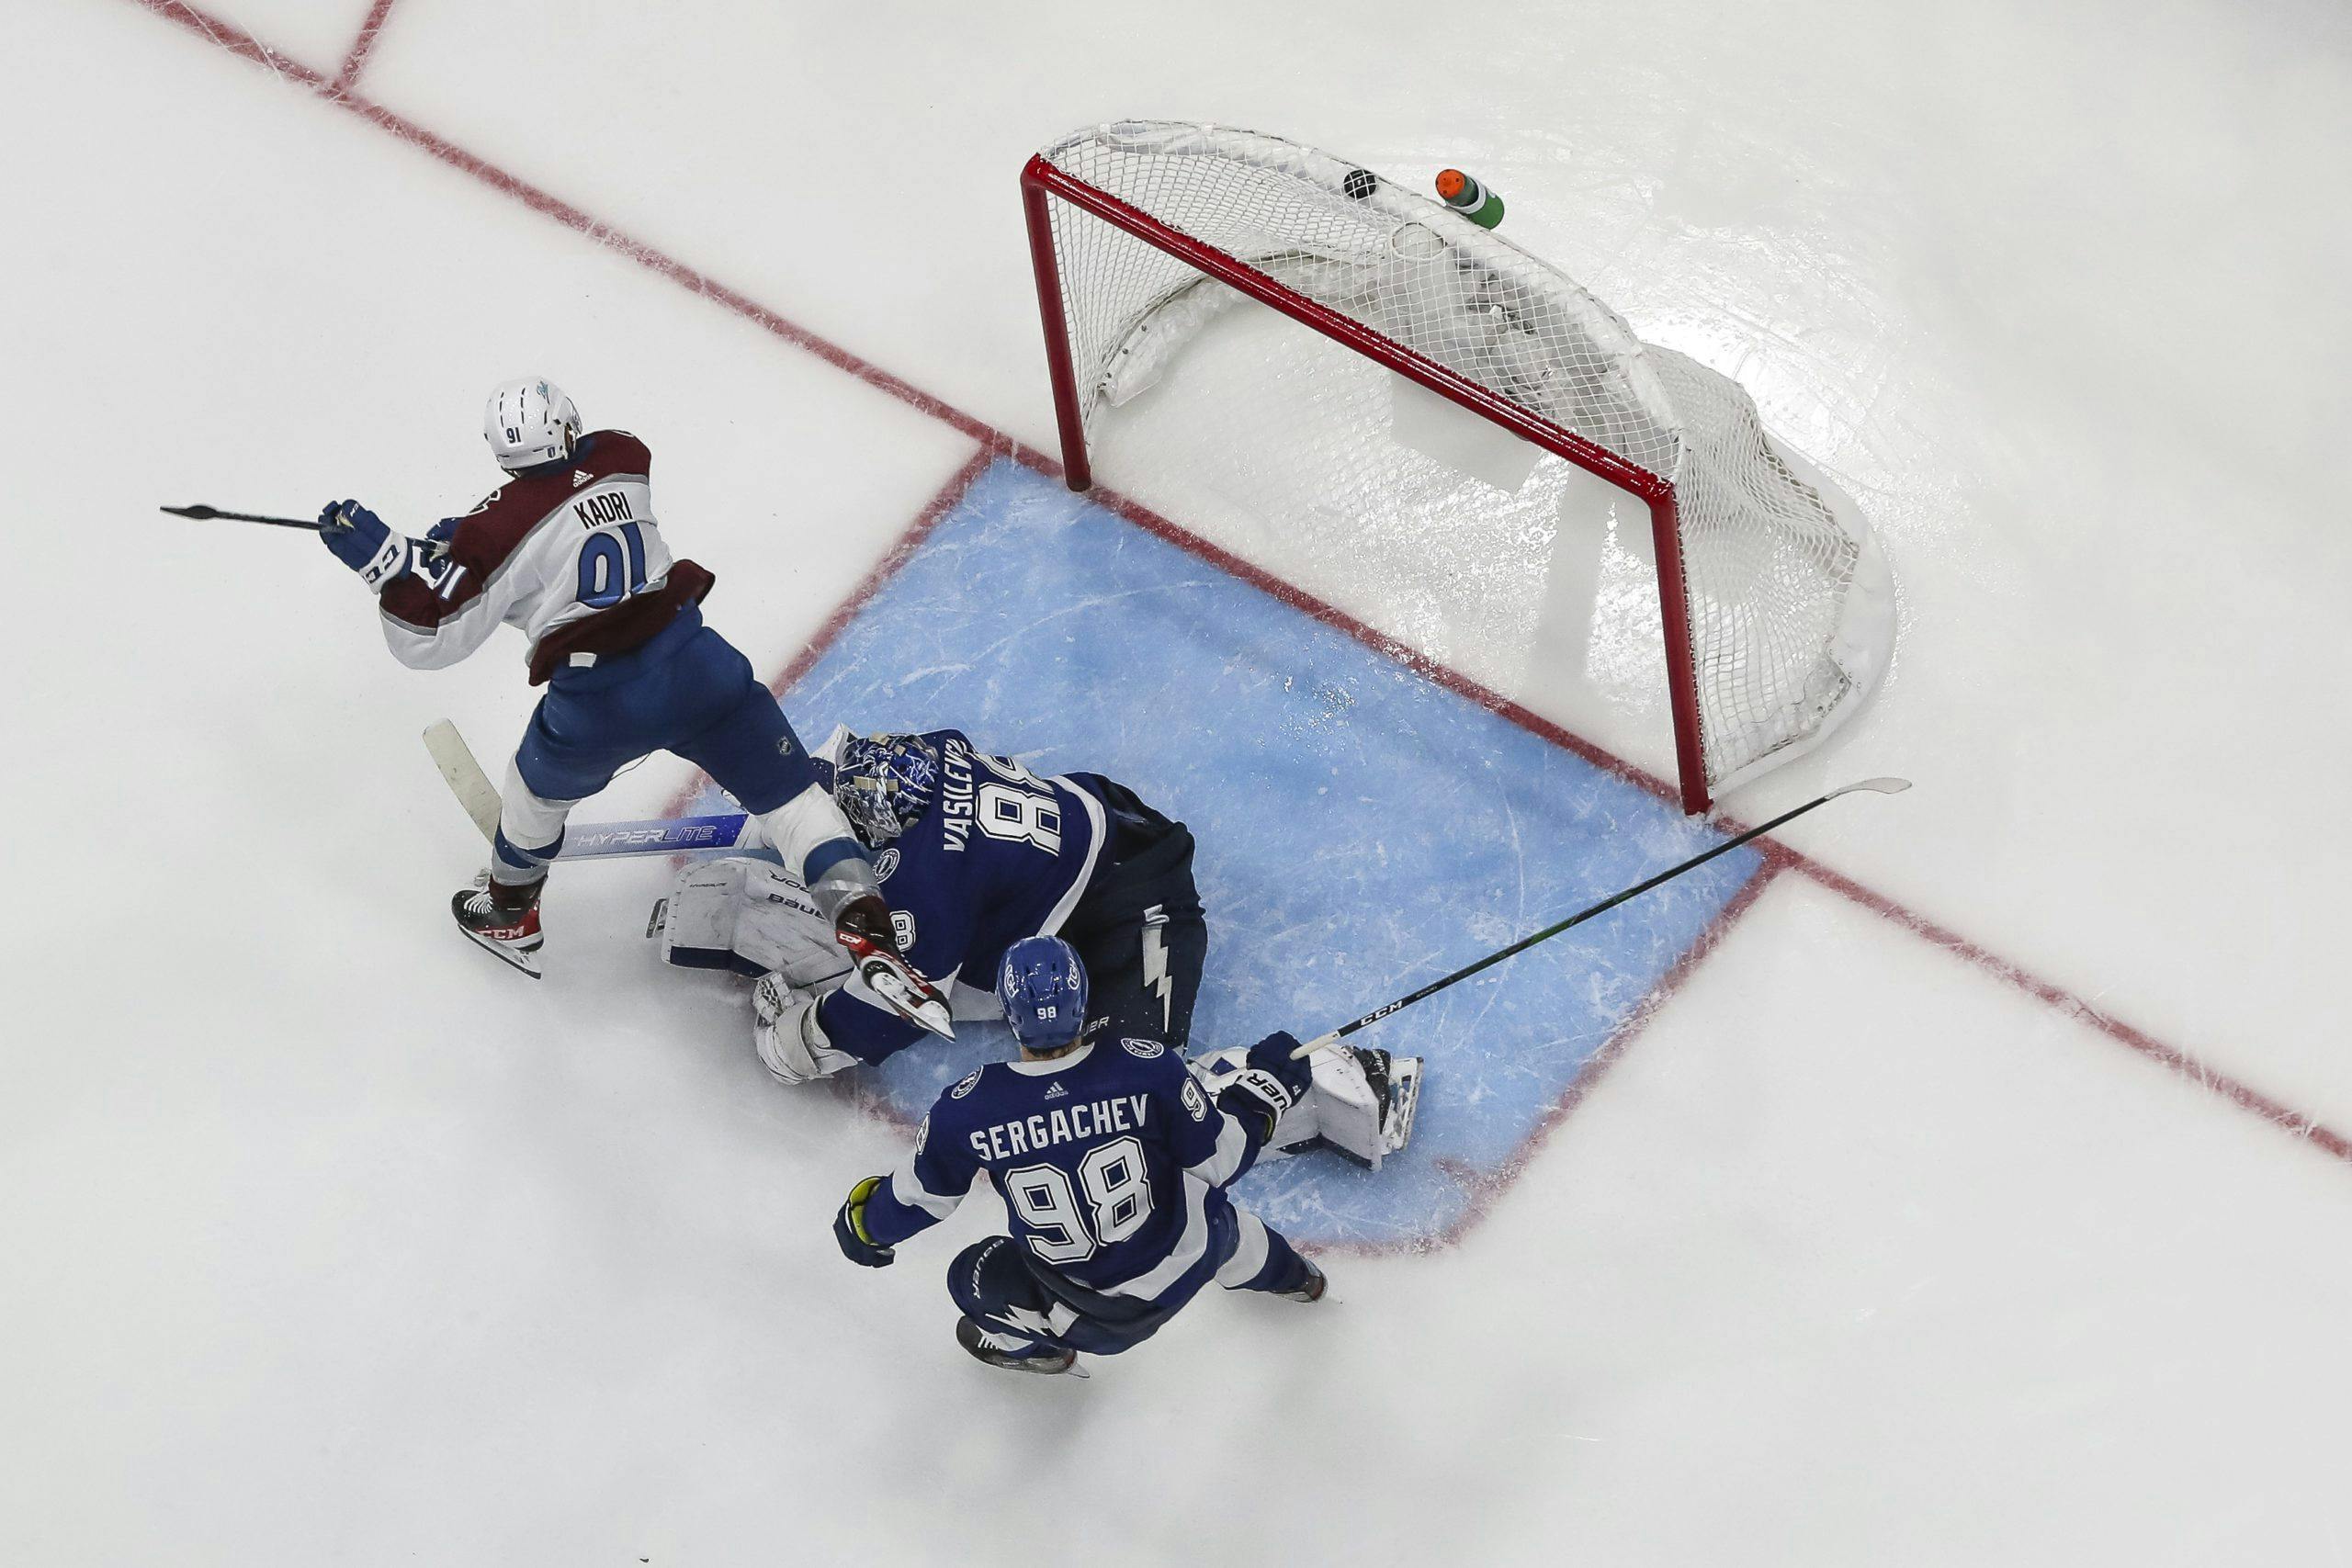 Nazem Kadri writes unbelievable redemption story with controversial Game 4 OT winner